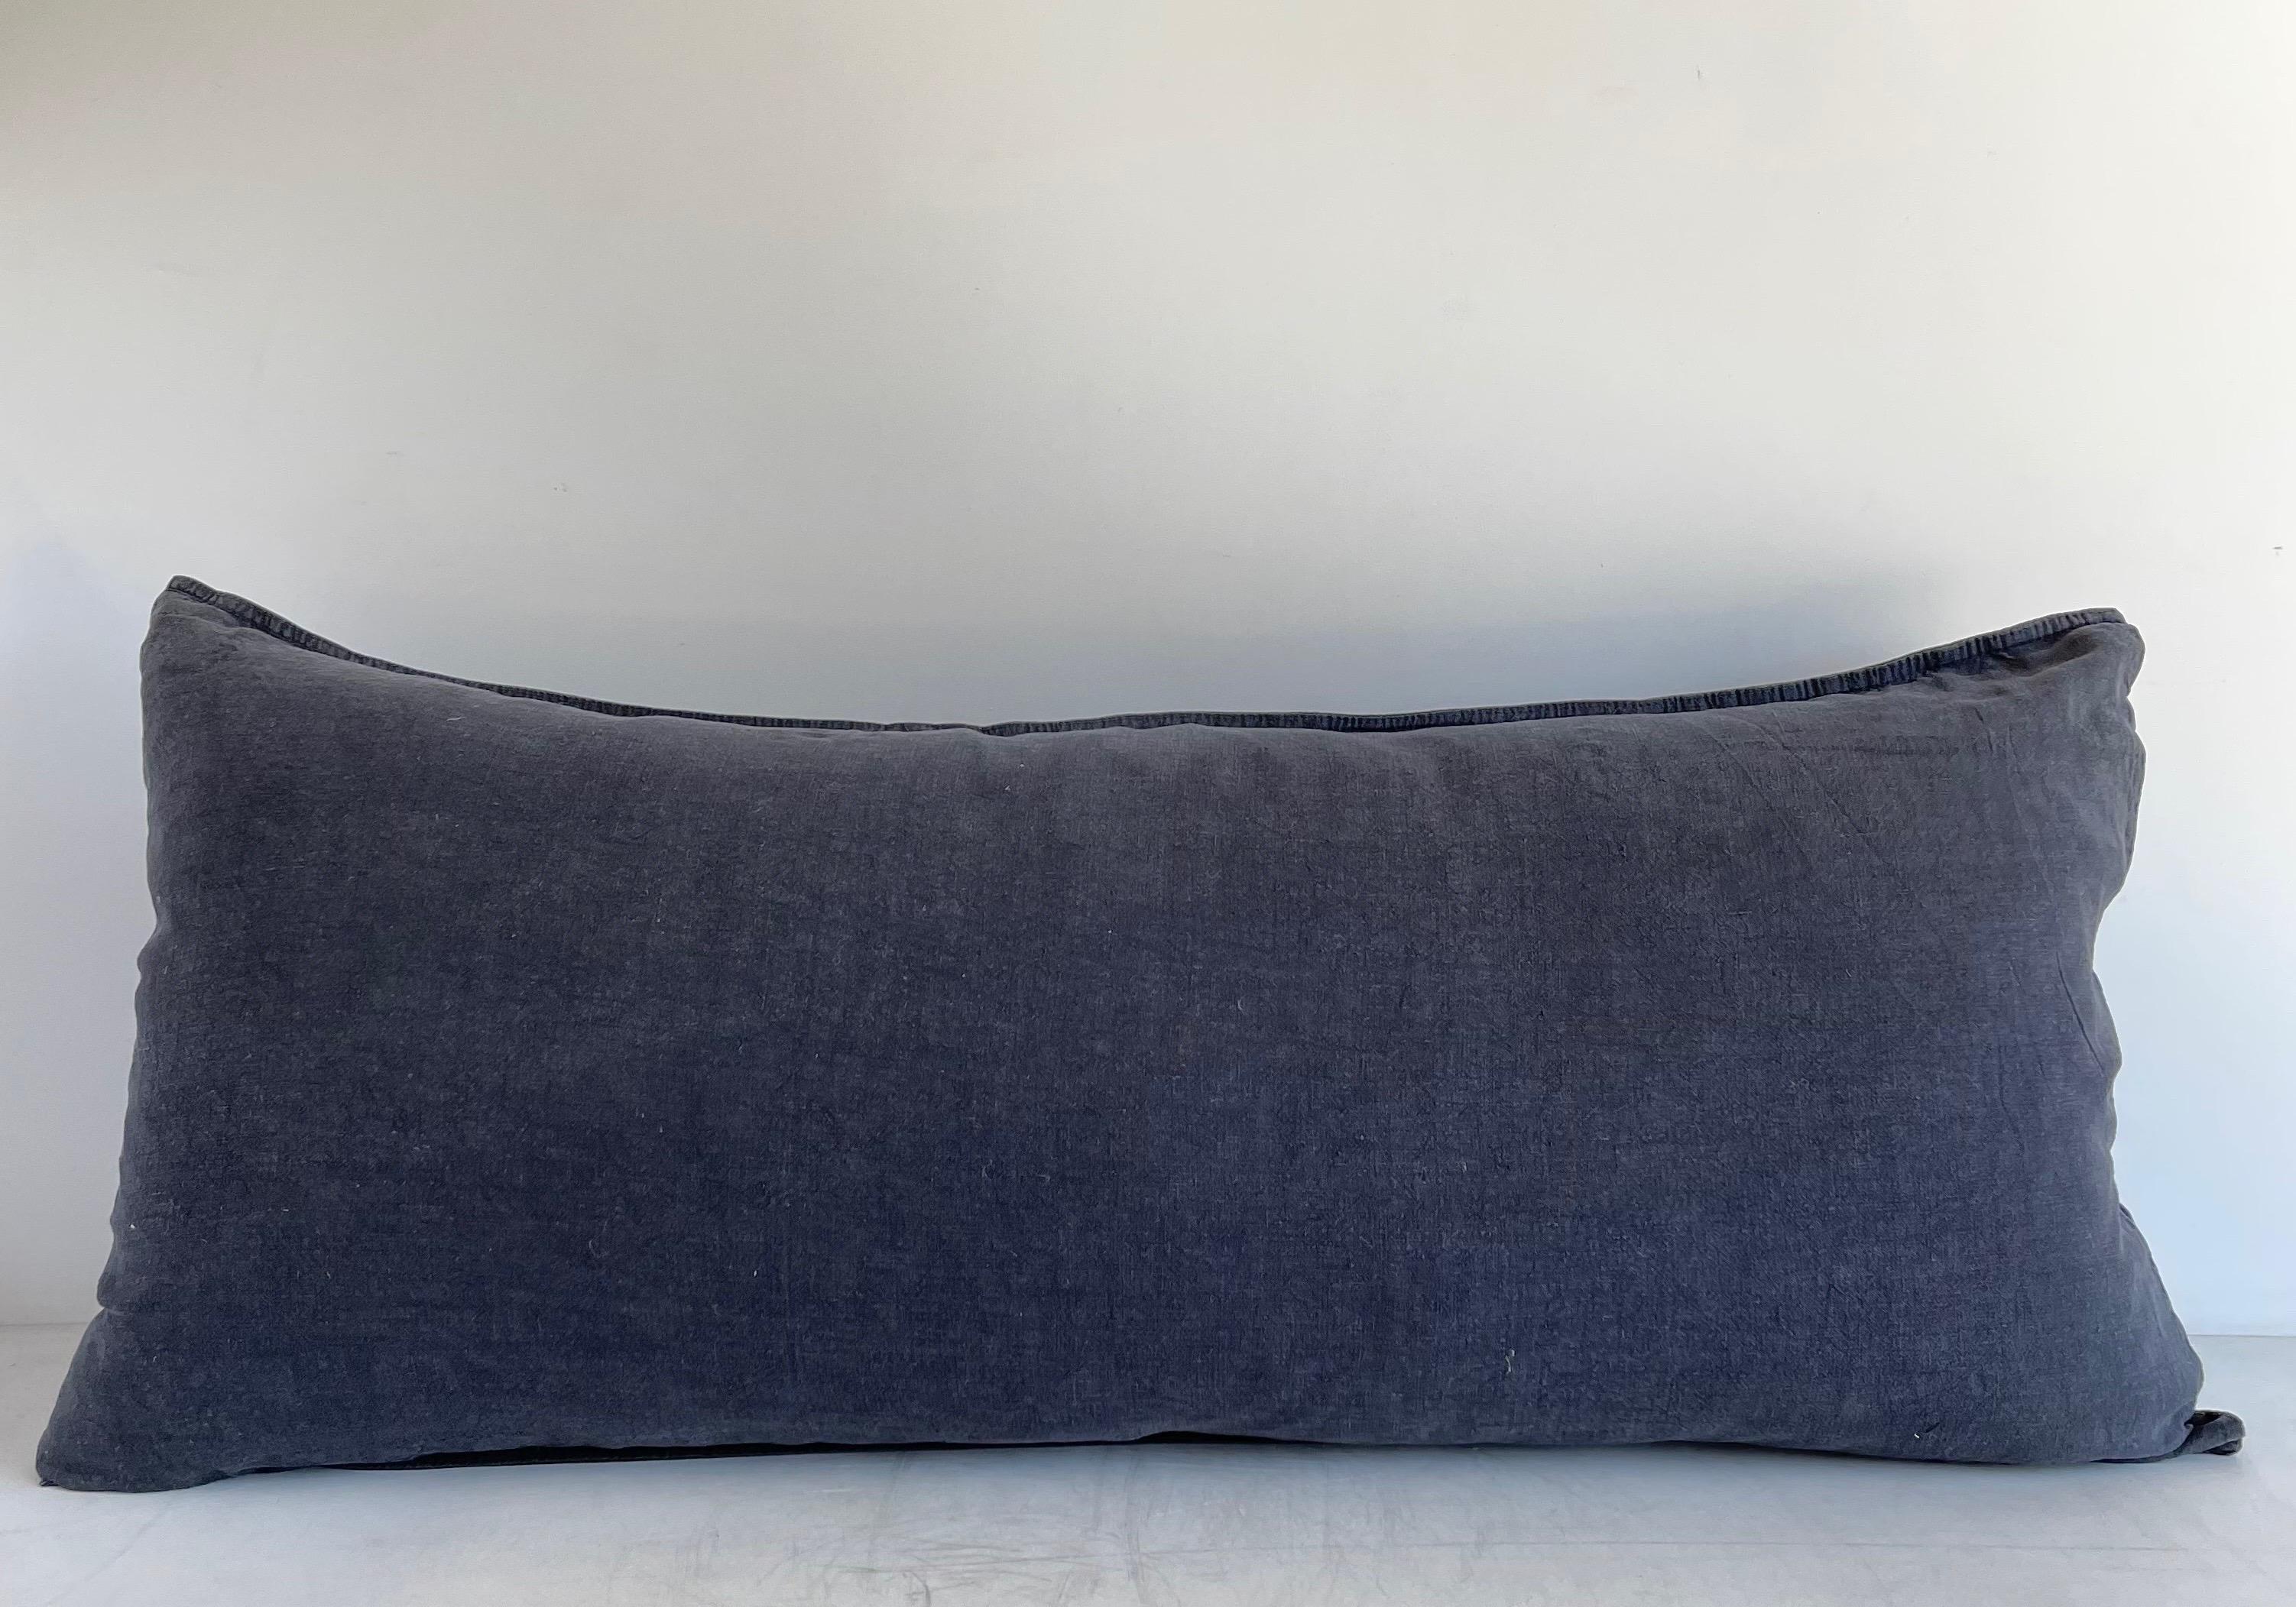 Beautiful French stone wash linen in black. Button closure, machine washable, tumble dry low.
Size: 16” x 32”
Pillow insert is not included, if you need one please let us know we will be able to add it into the listing as a customization.